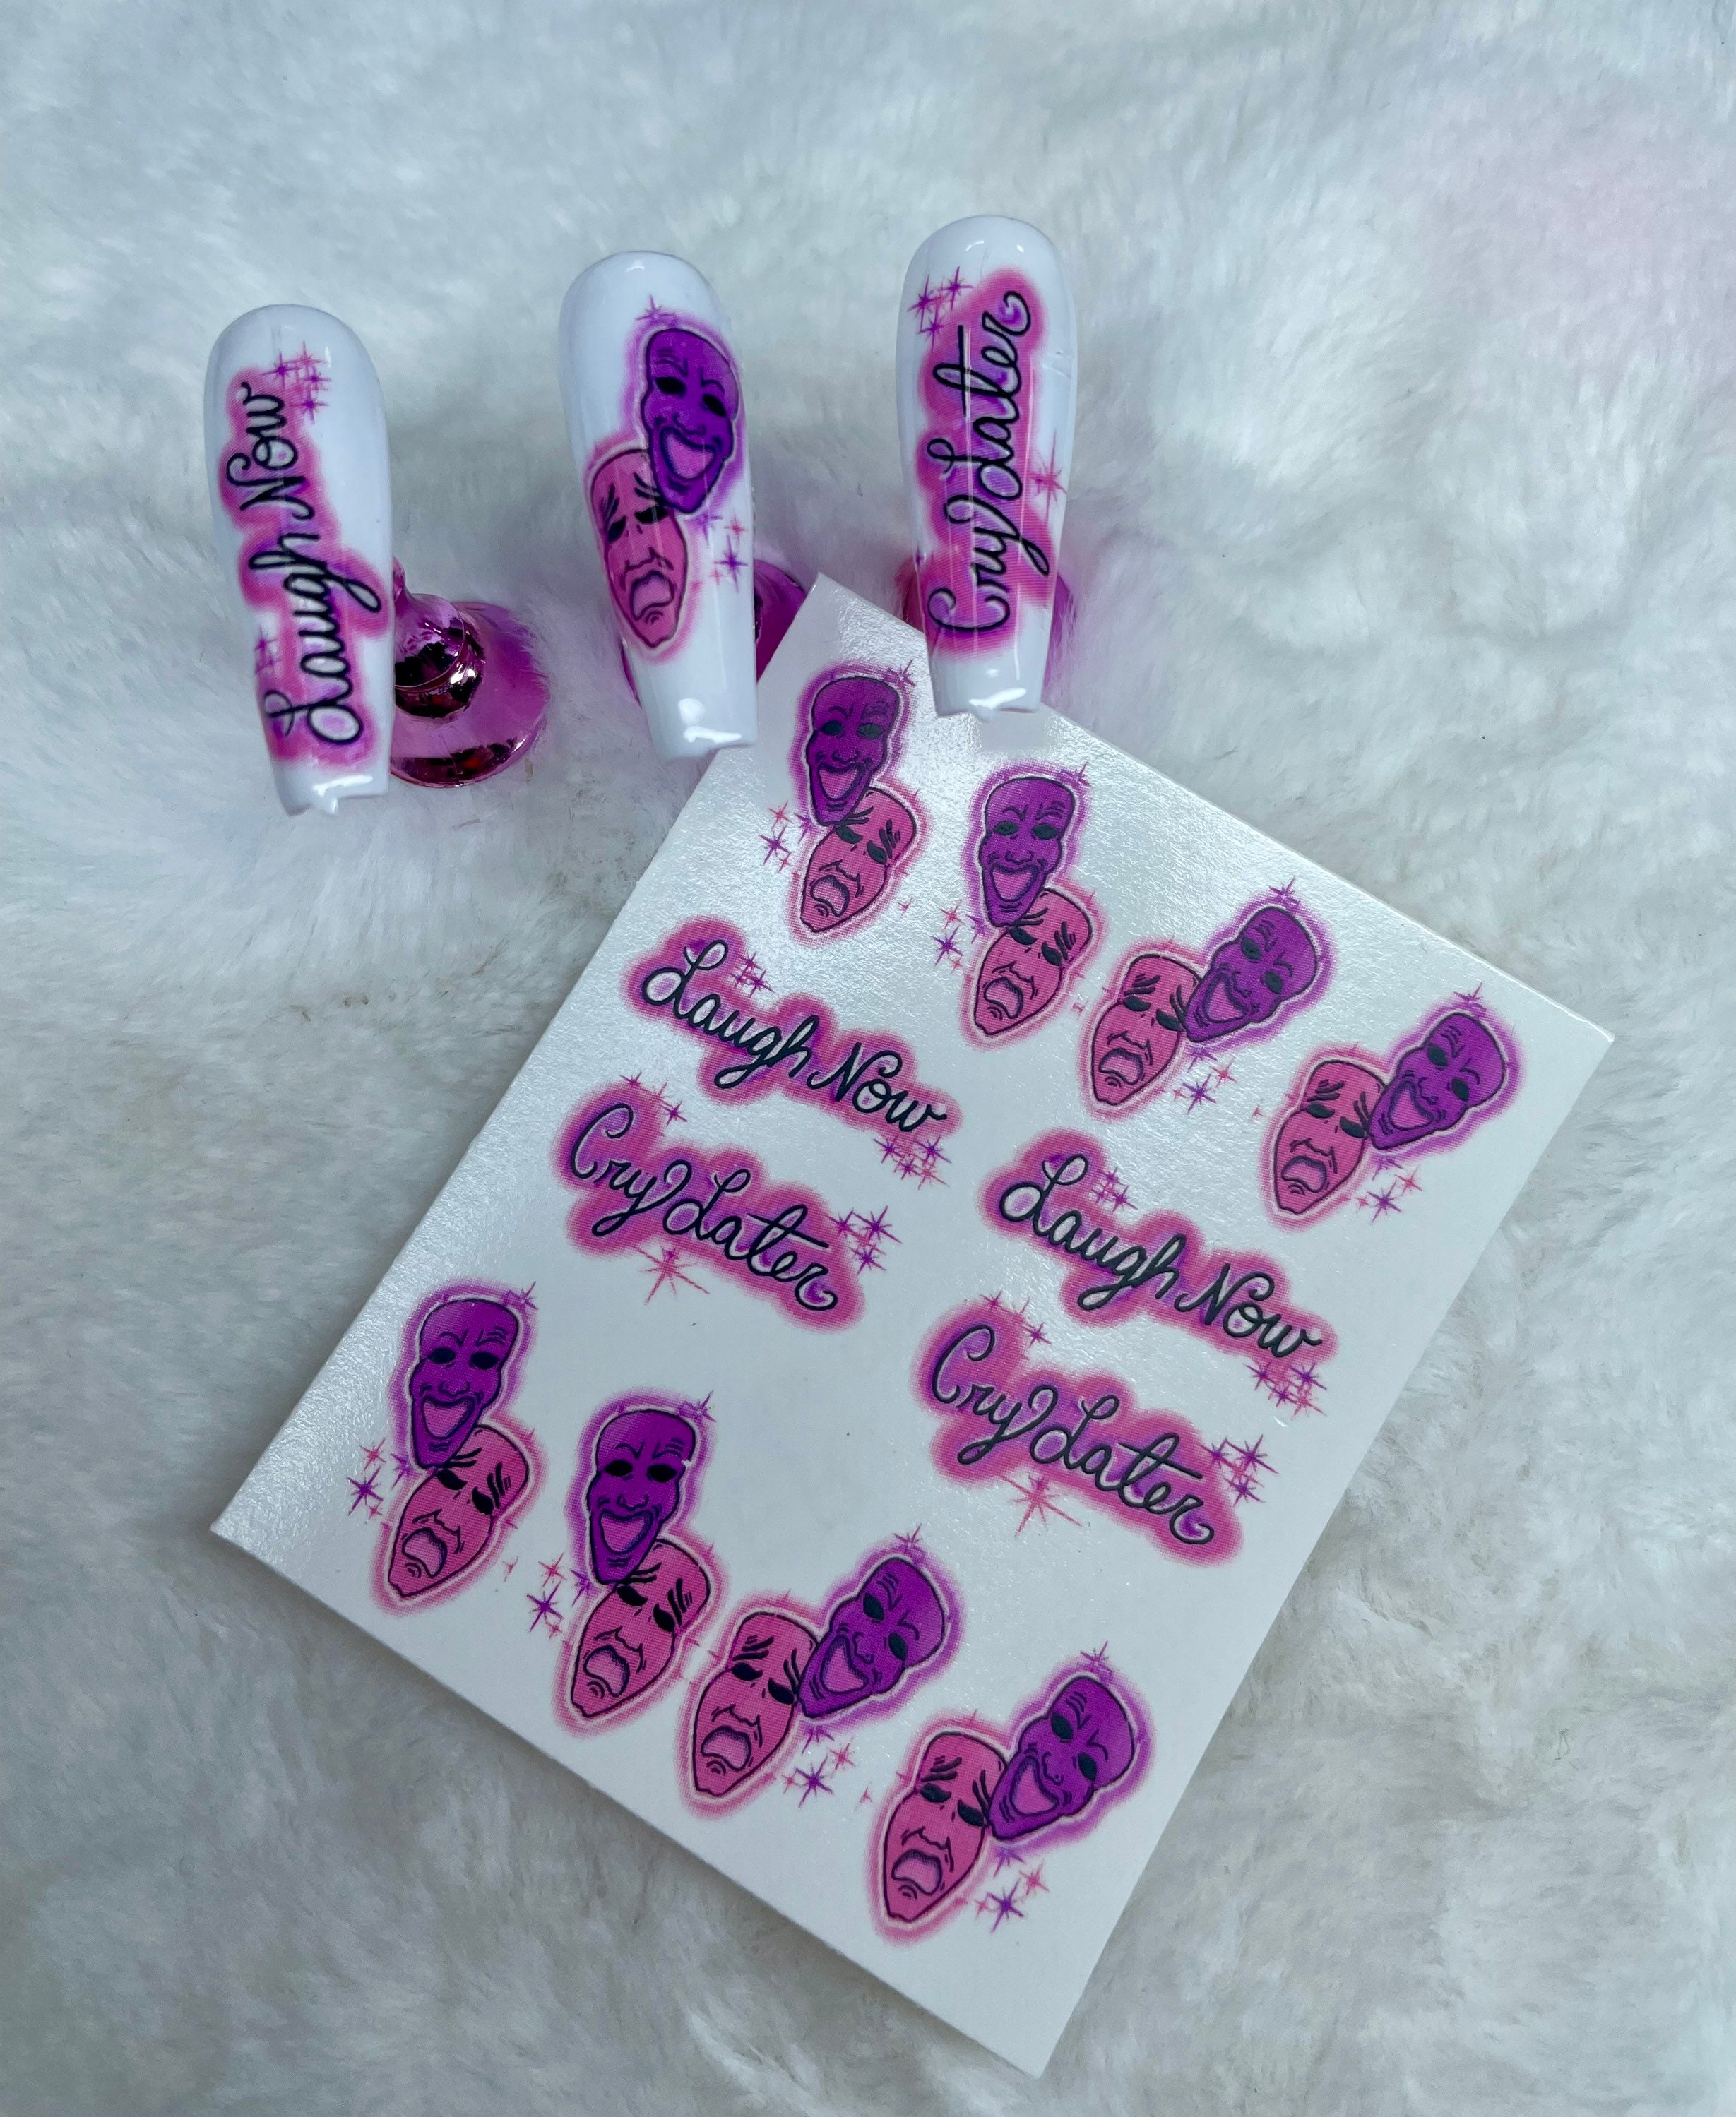 90s Airbrush Nail Art Decals Waterslide Nail Decals Jokers Girl Chola Nail  Art Mancure Nail Decoration kit Smile Now cry Later Sgv sad Girl Chicano